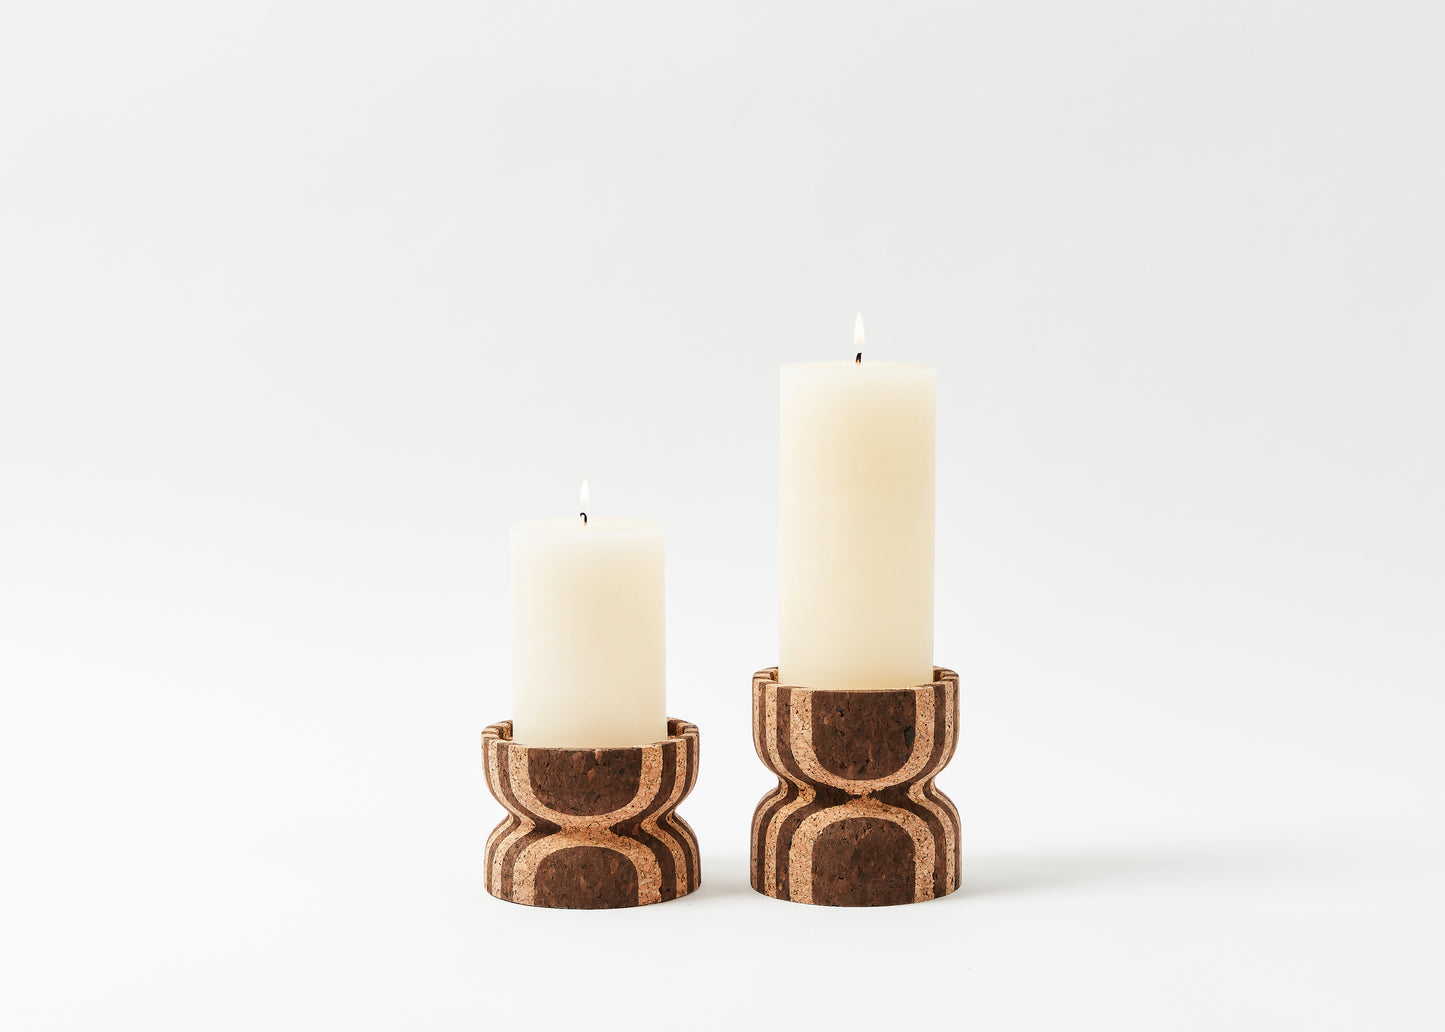 Anni Short Striped Cork Candle Holder shown layered with the medium candle holder.